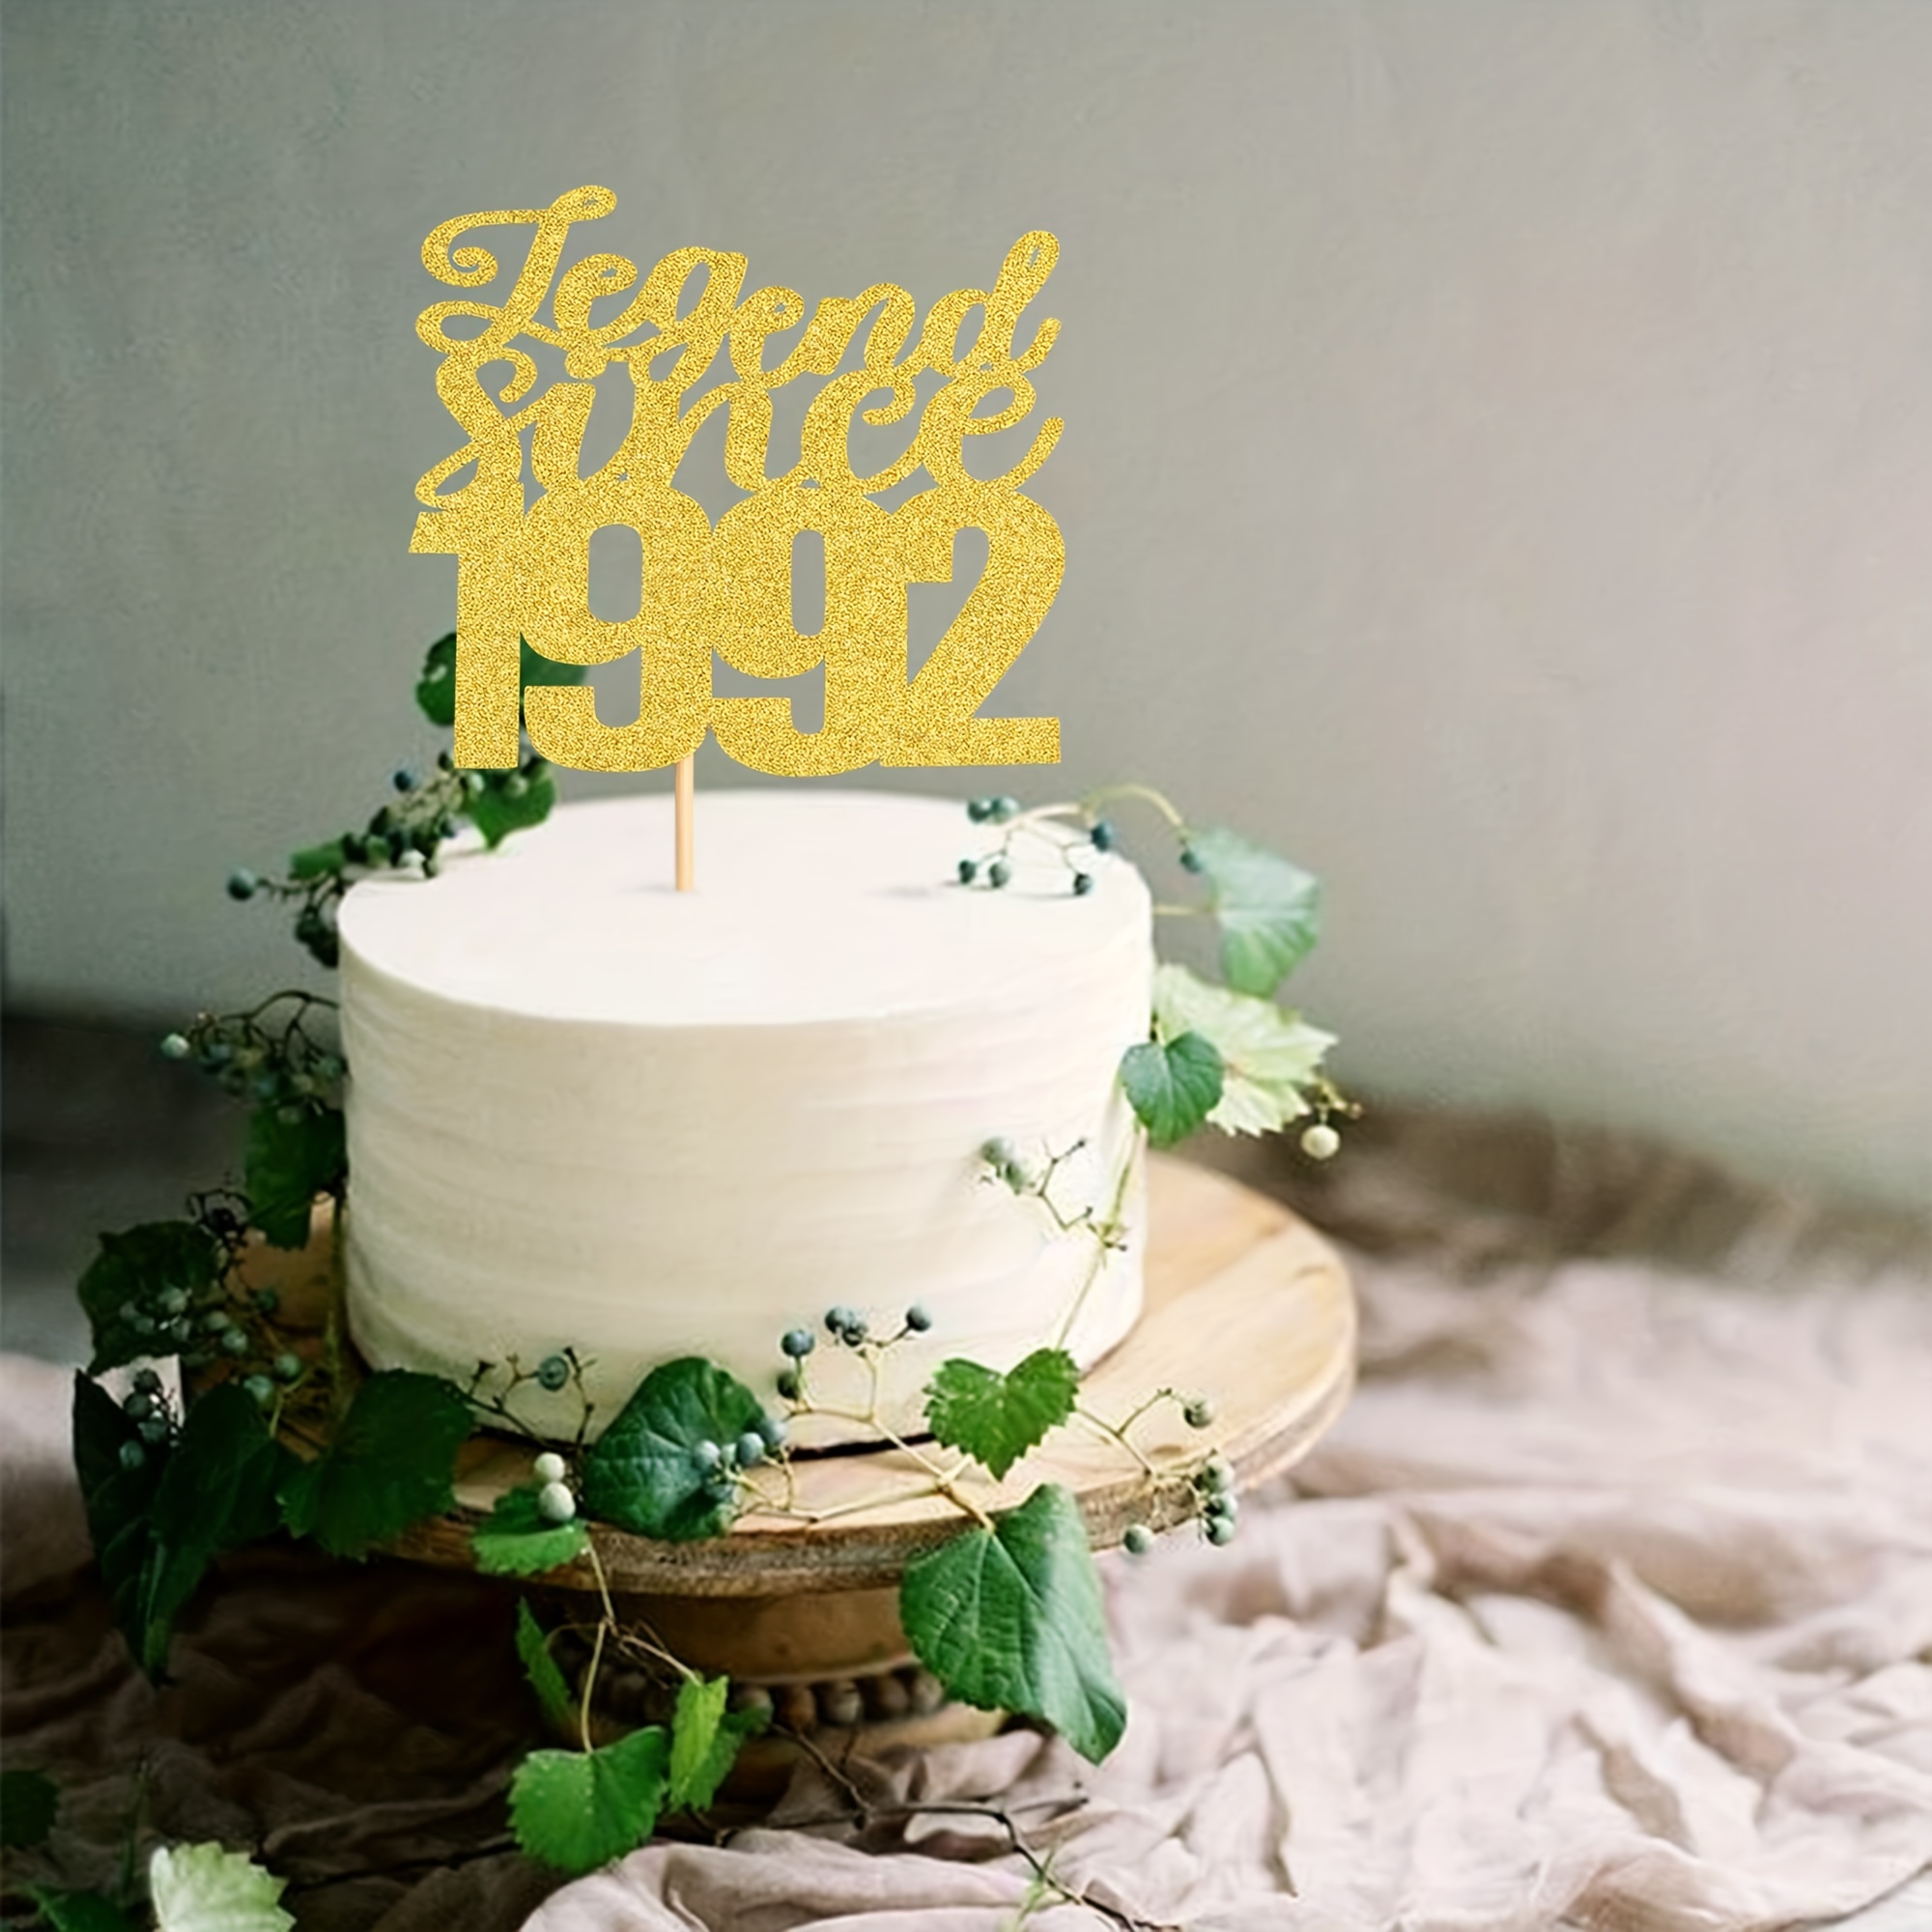 Aggregate 77+ 29th anniversary cake images best - awesomeenglish.edu.vn